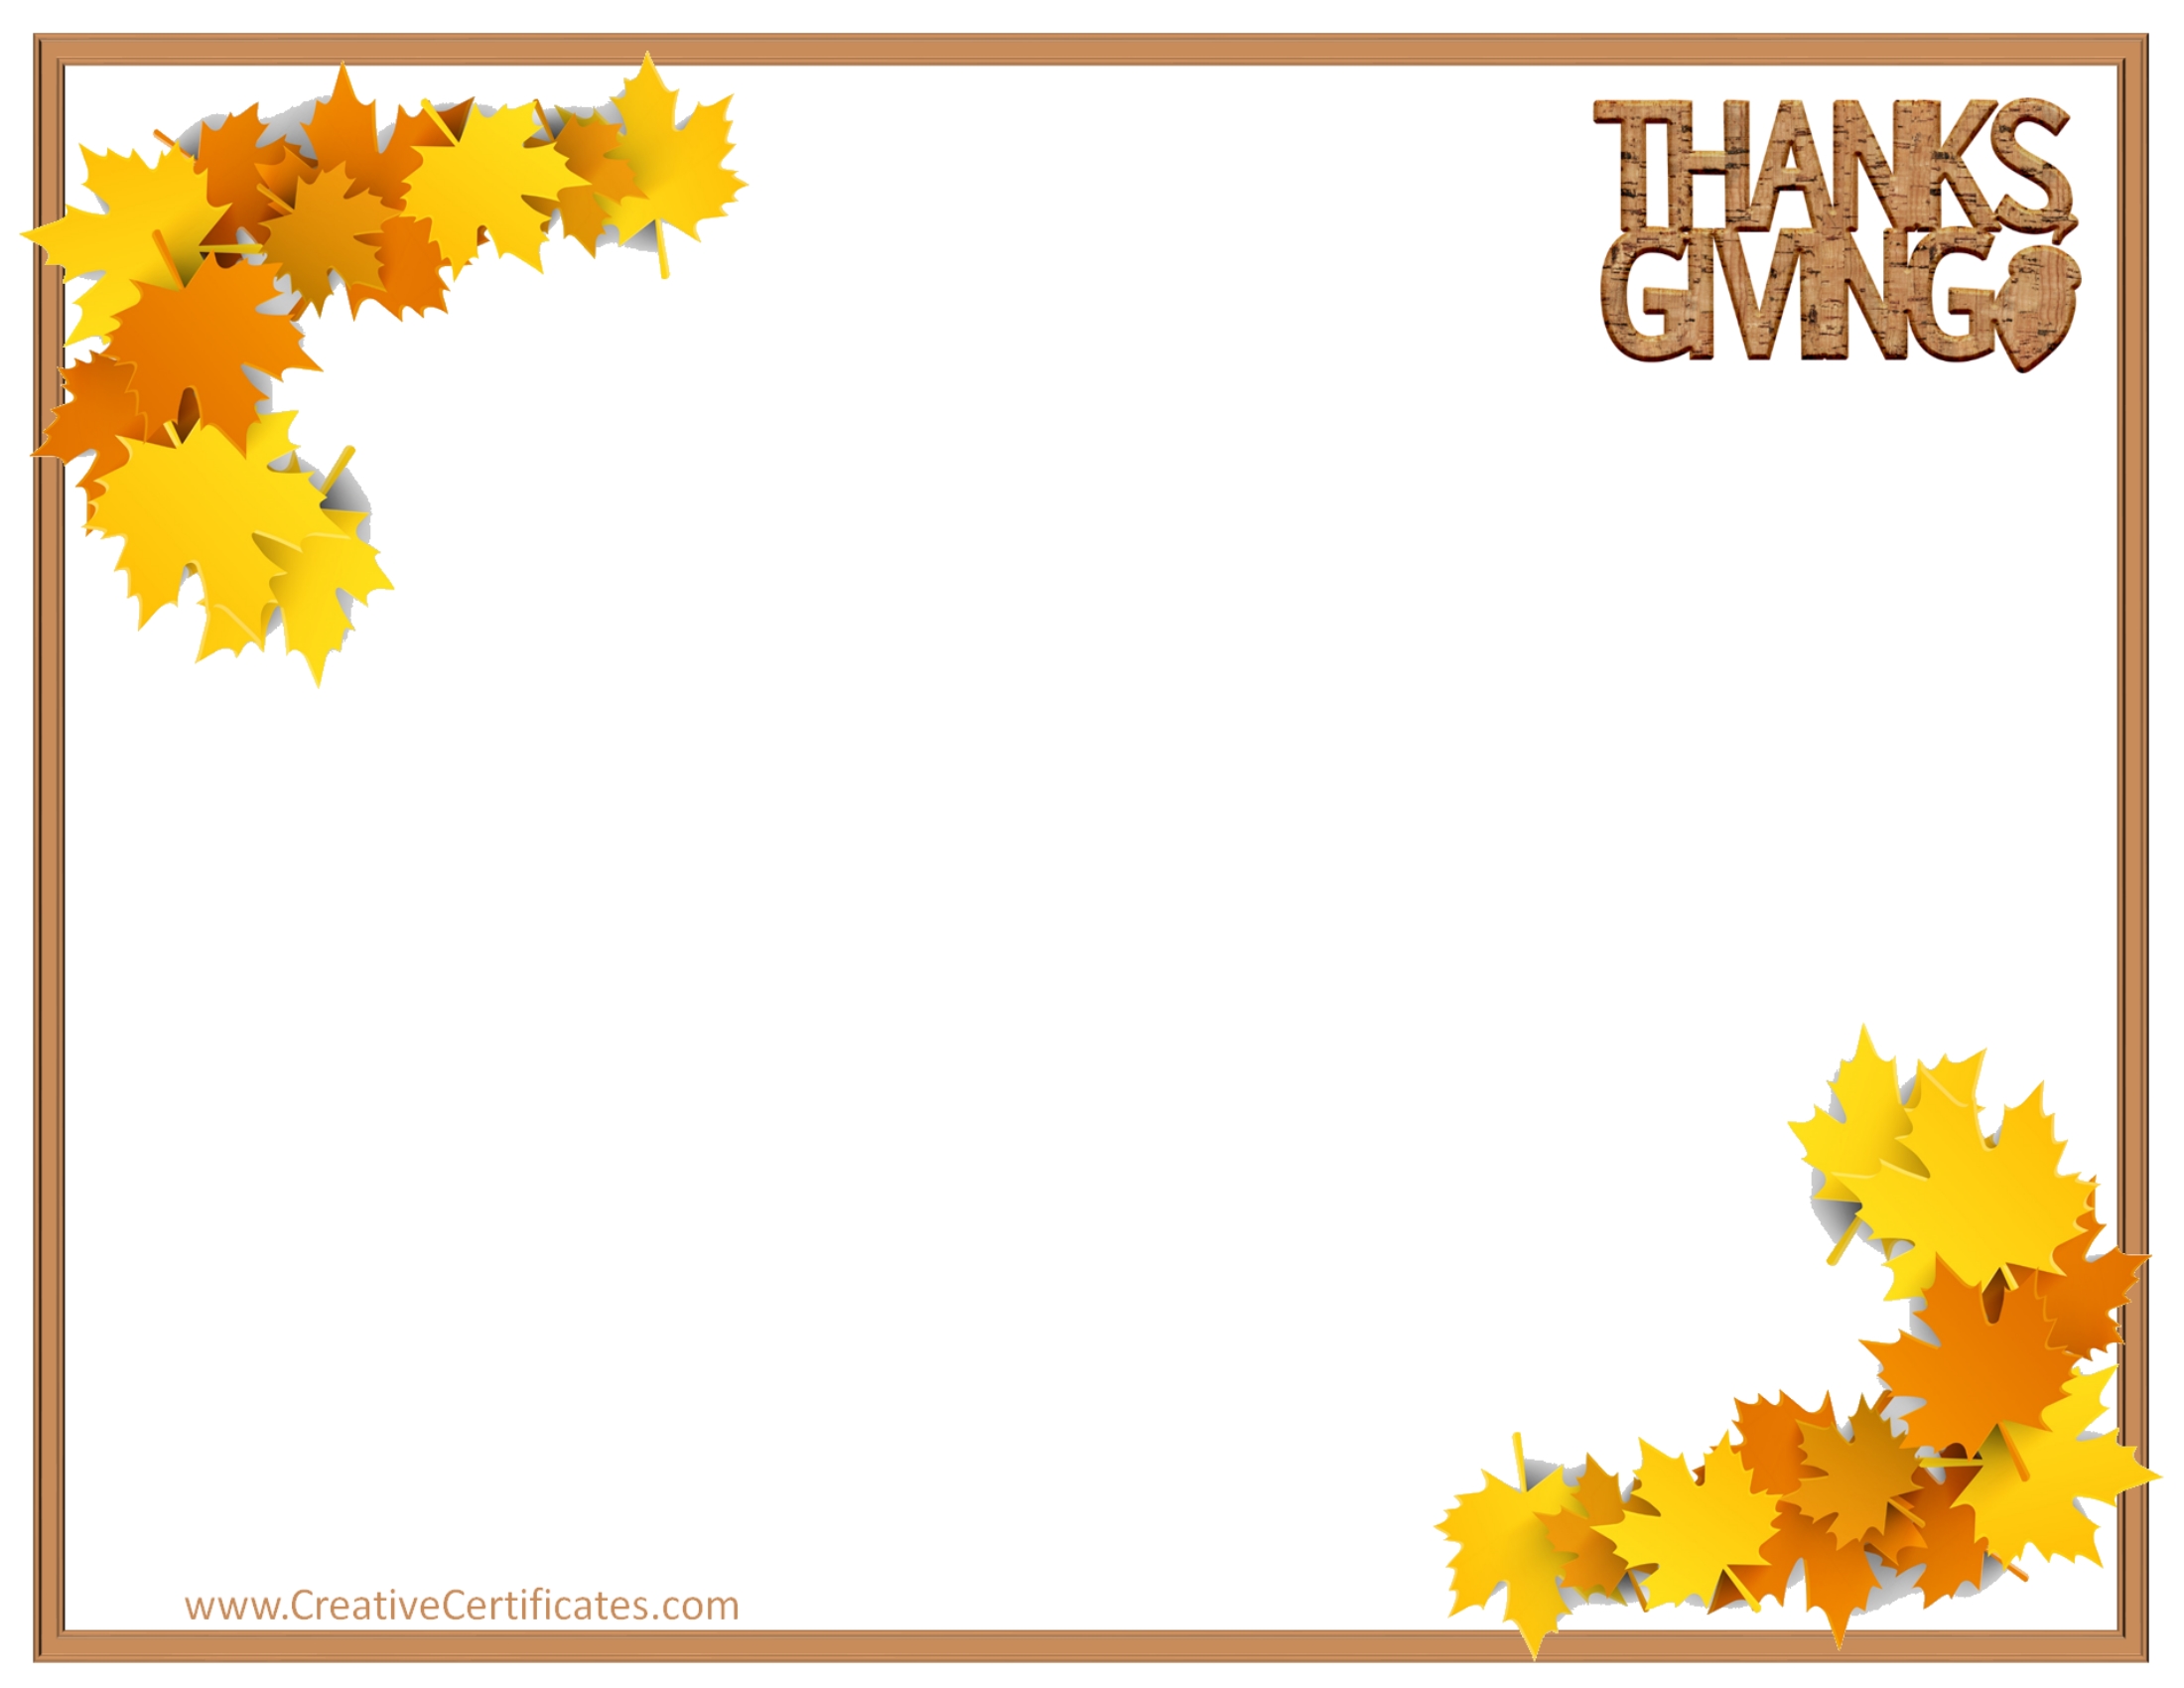 thanksgiving-border-images-free-thanksgiving-borders-2-wikiclipart